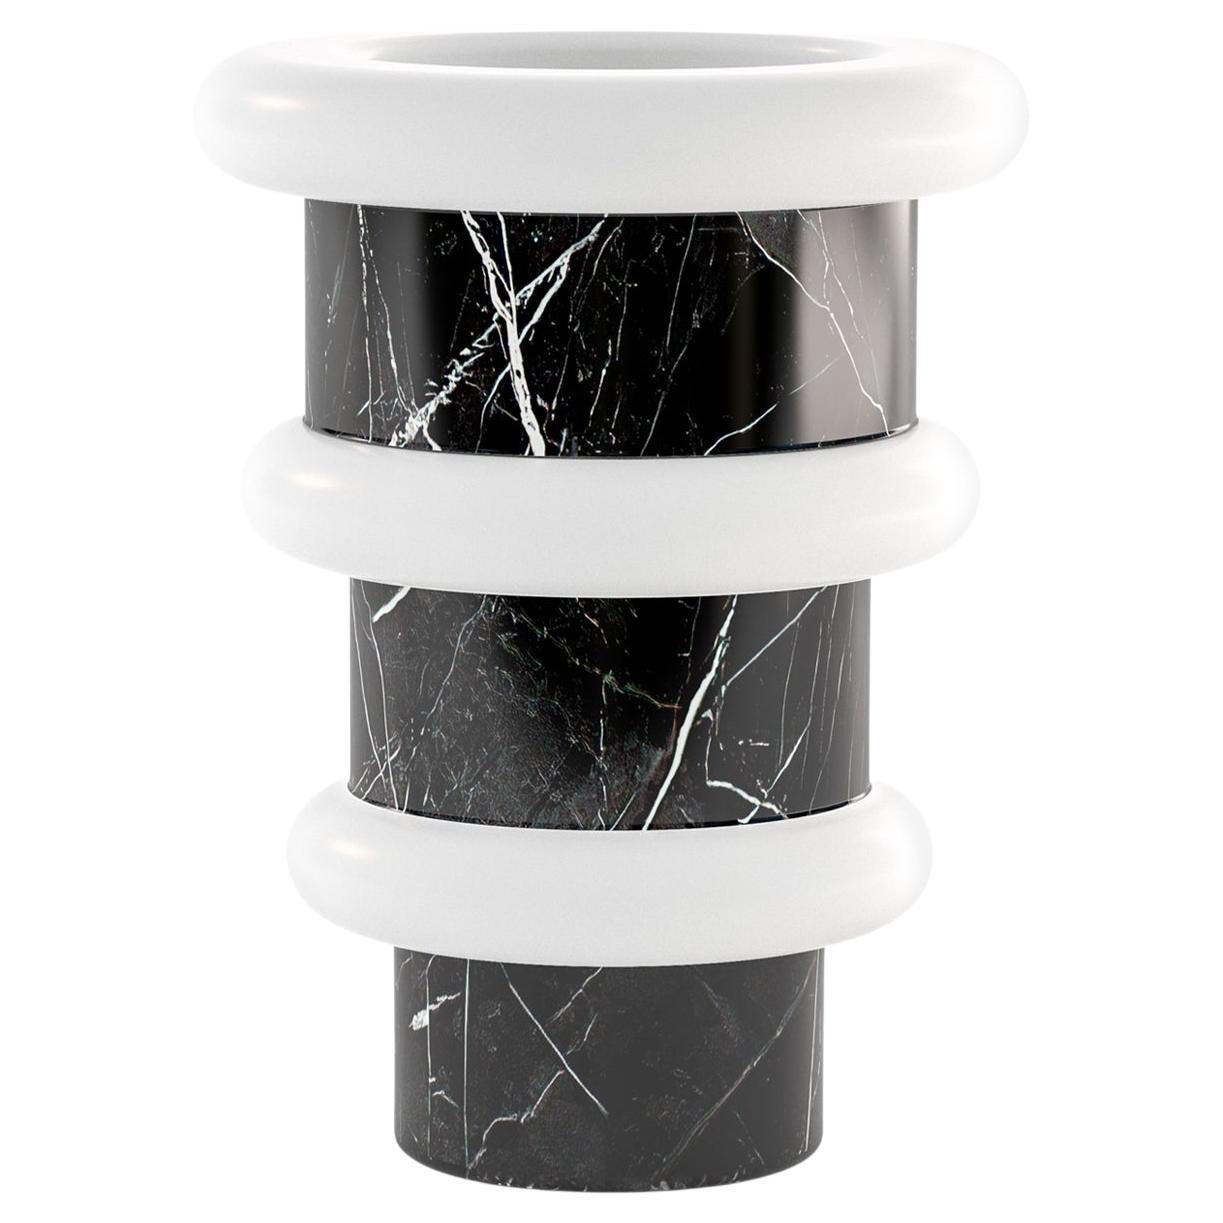 Limited Edition Vase in Black and White Marble, Made to order in Italy For Sale